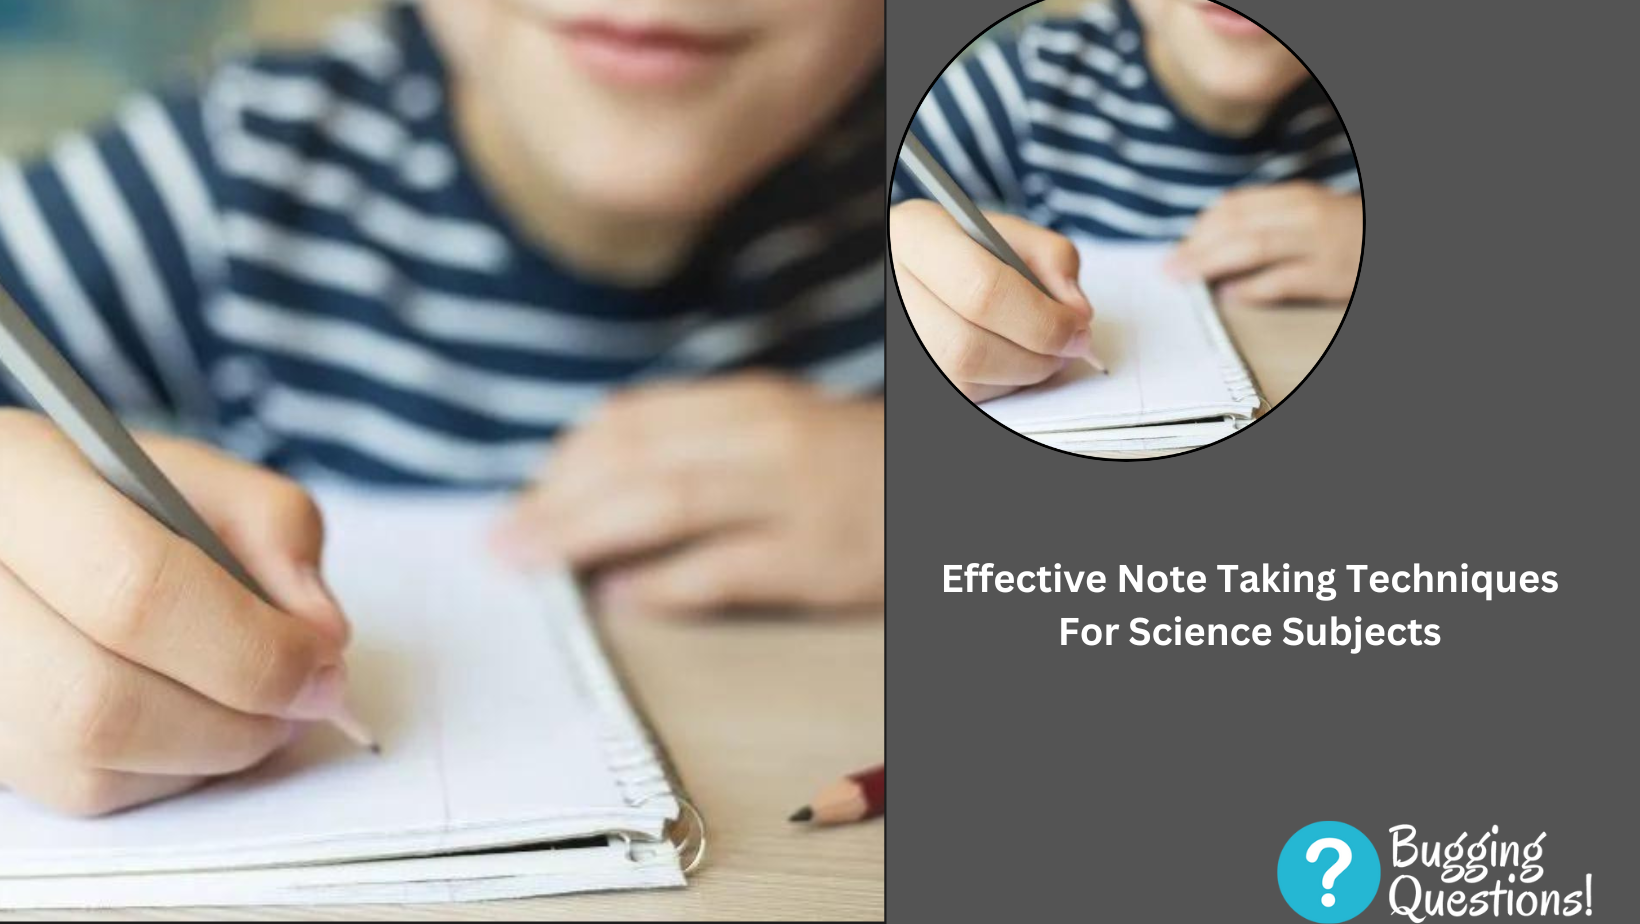 Effective Note Taking Techniques For Science Subjects